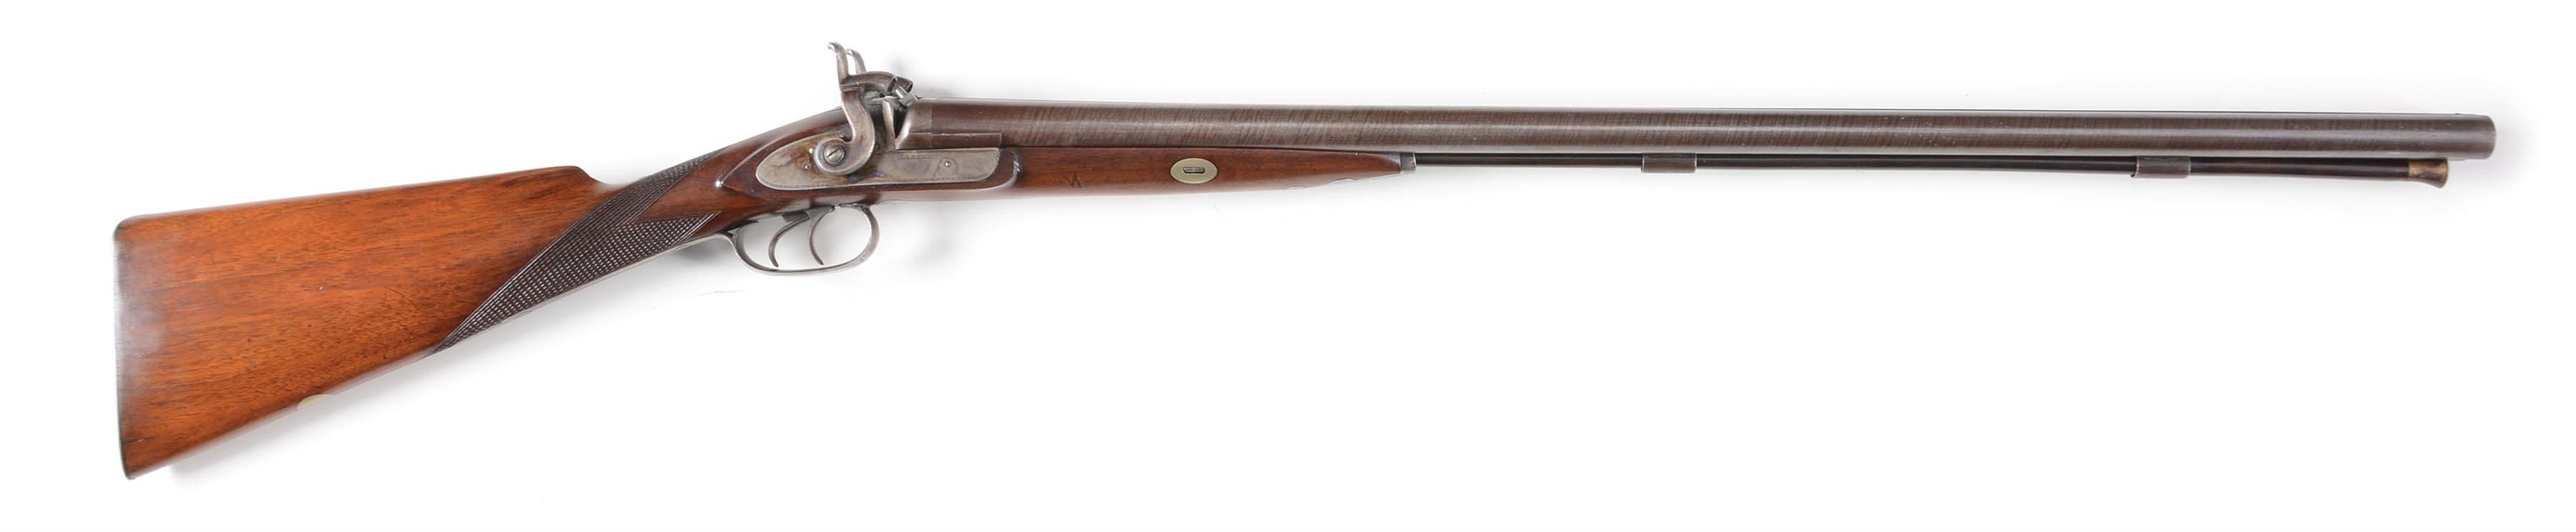 (A) LIKELY BELGIAN MADE "PARKER" MARKED 12 BORE DOUBLE BARREL MUZZLELOADING SHOTGUN.